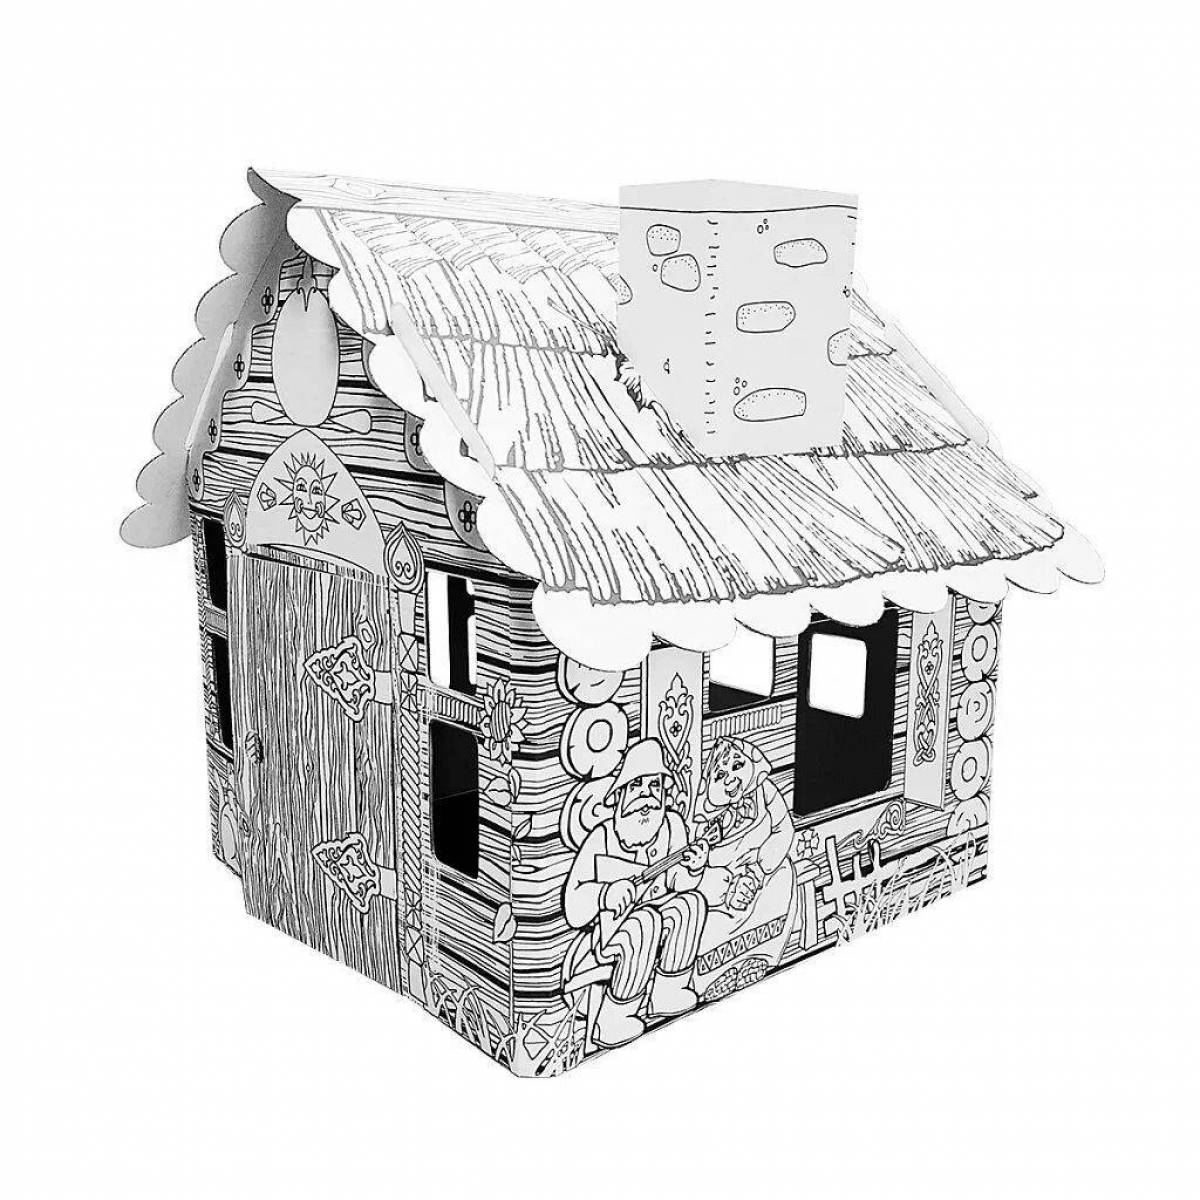 Incredible cardboard house coloring book for kids